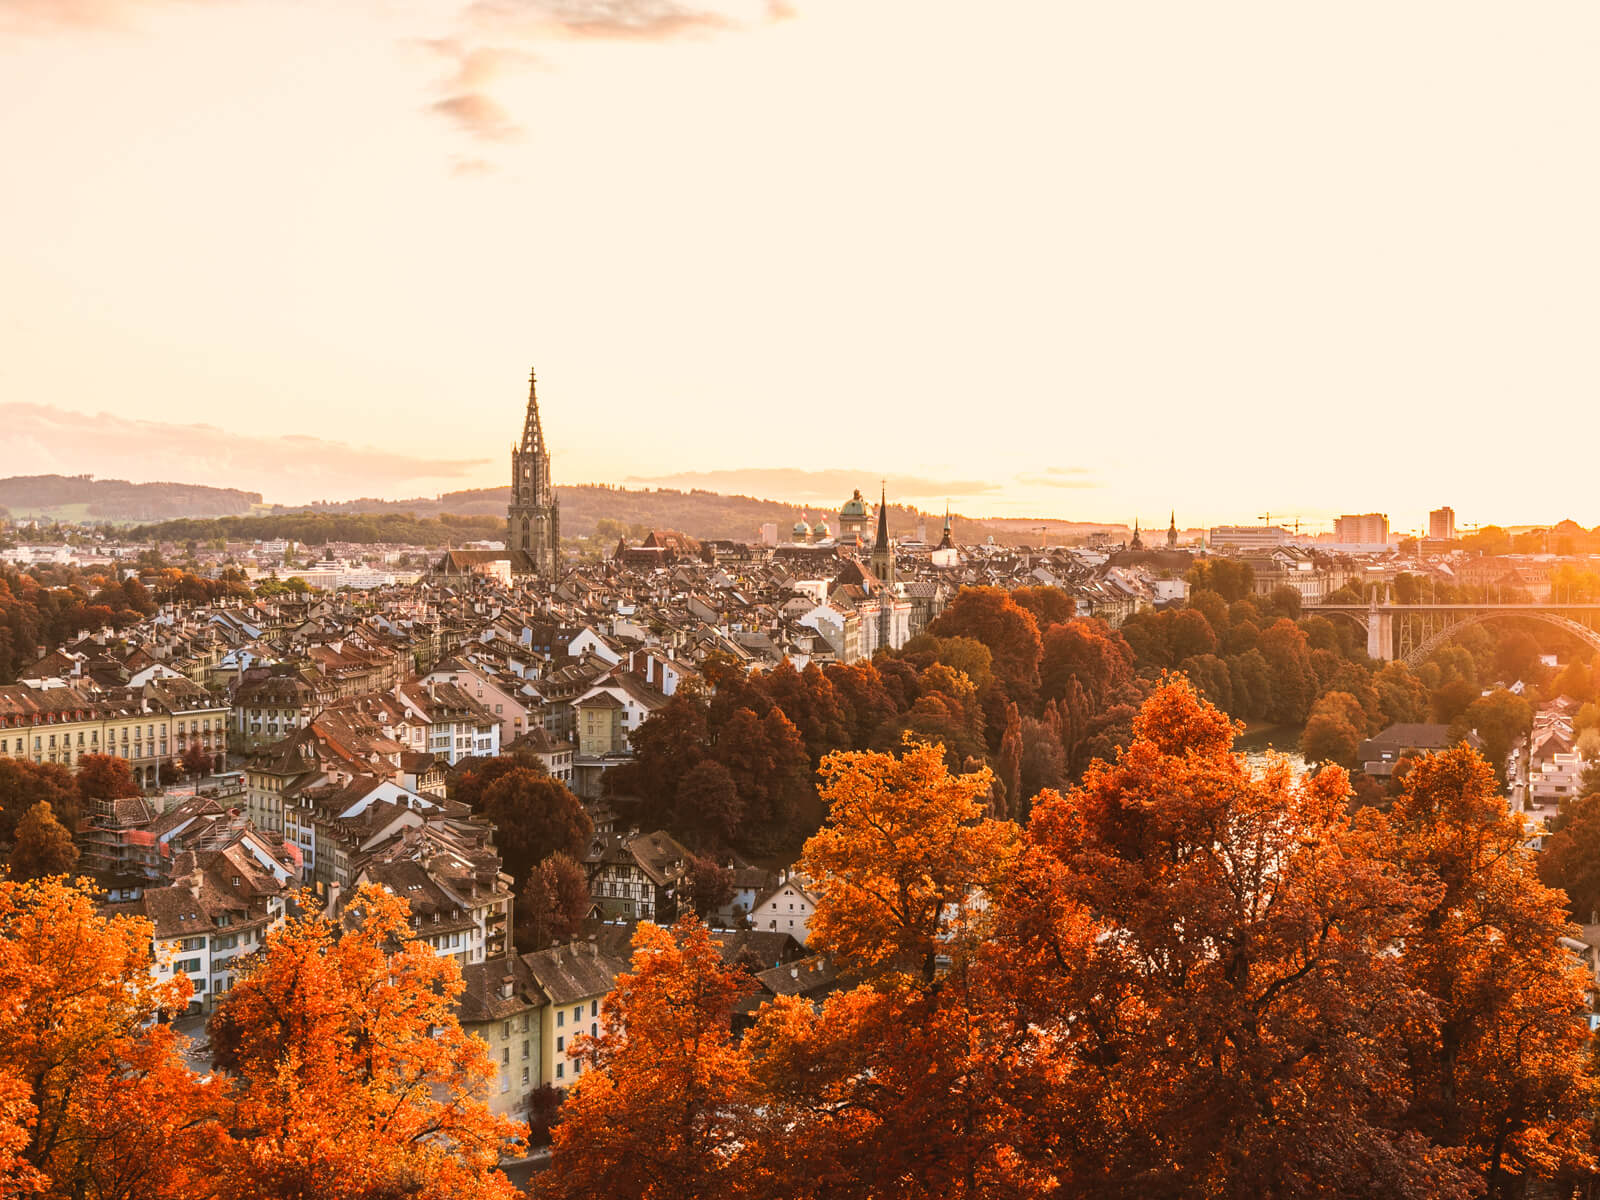 Autumn in Switzerland - Old Town of Bern during Sunset